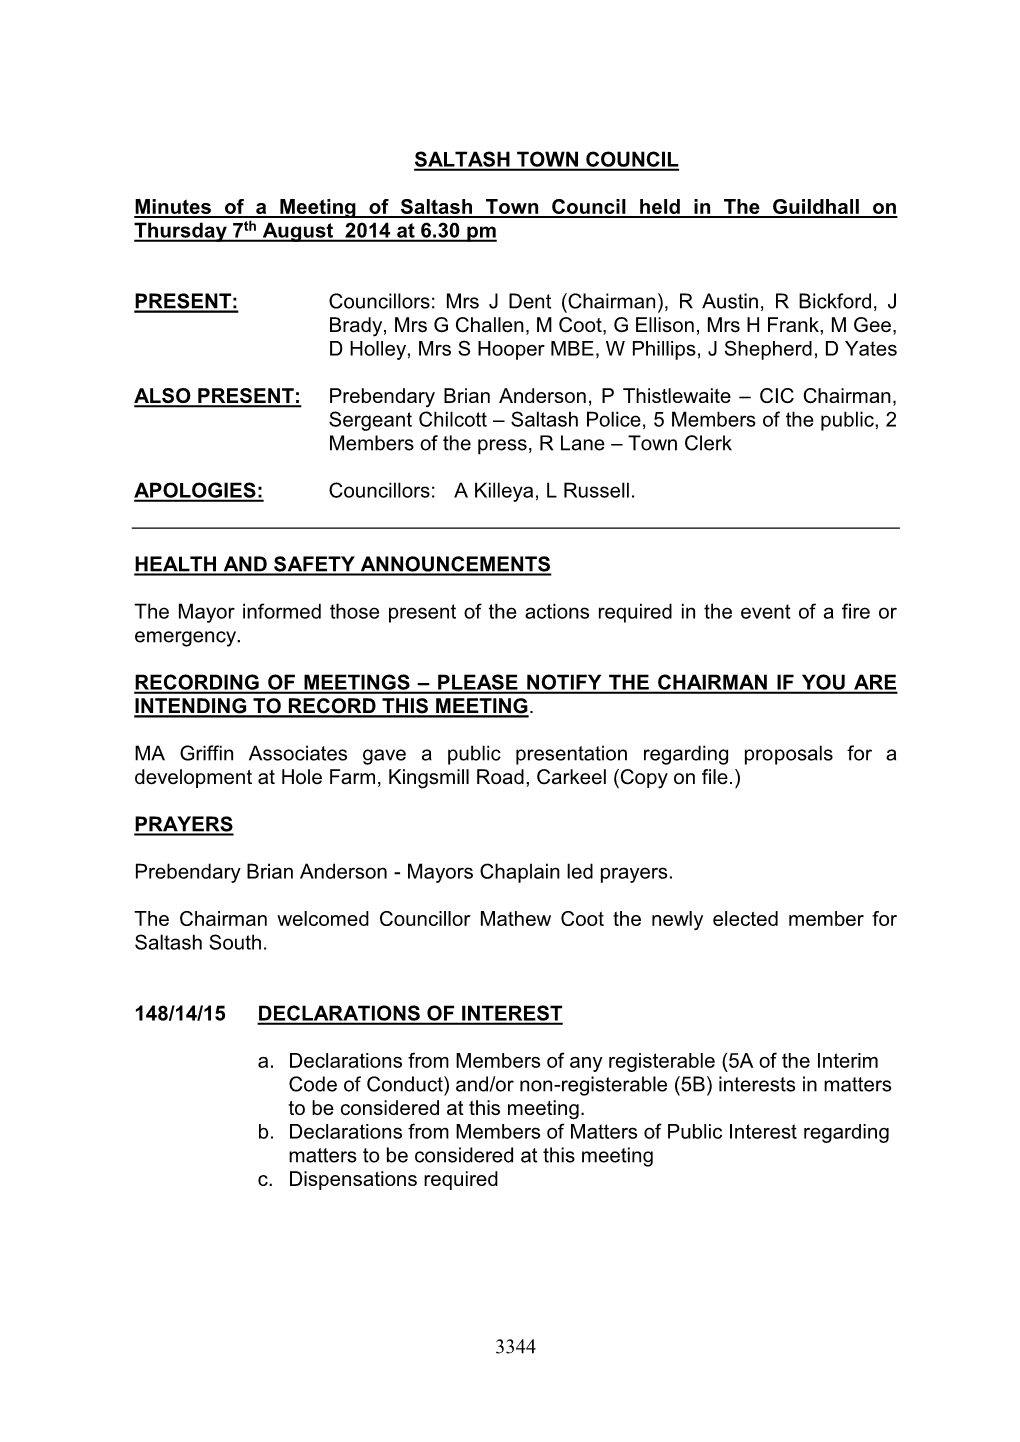 Minutes of a Meeting of Saltash Town Council Held in the Guildhall on Thursday 7Th August 2014 at 6.30 Pm